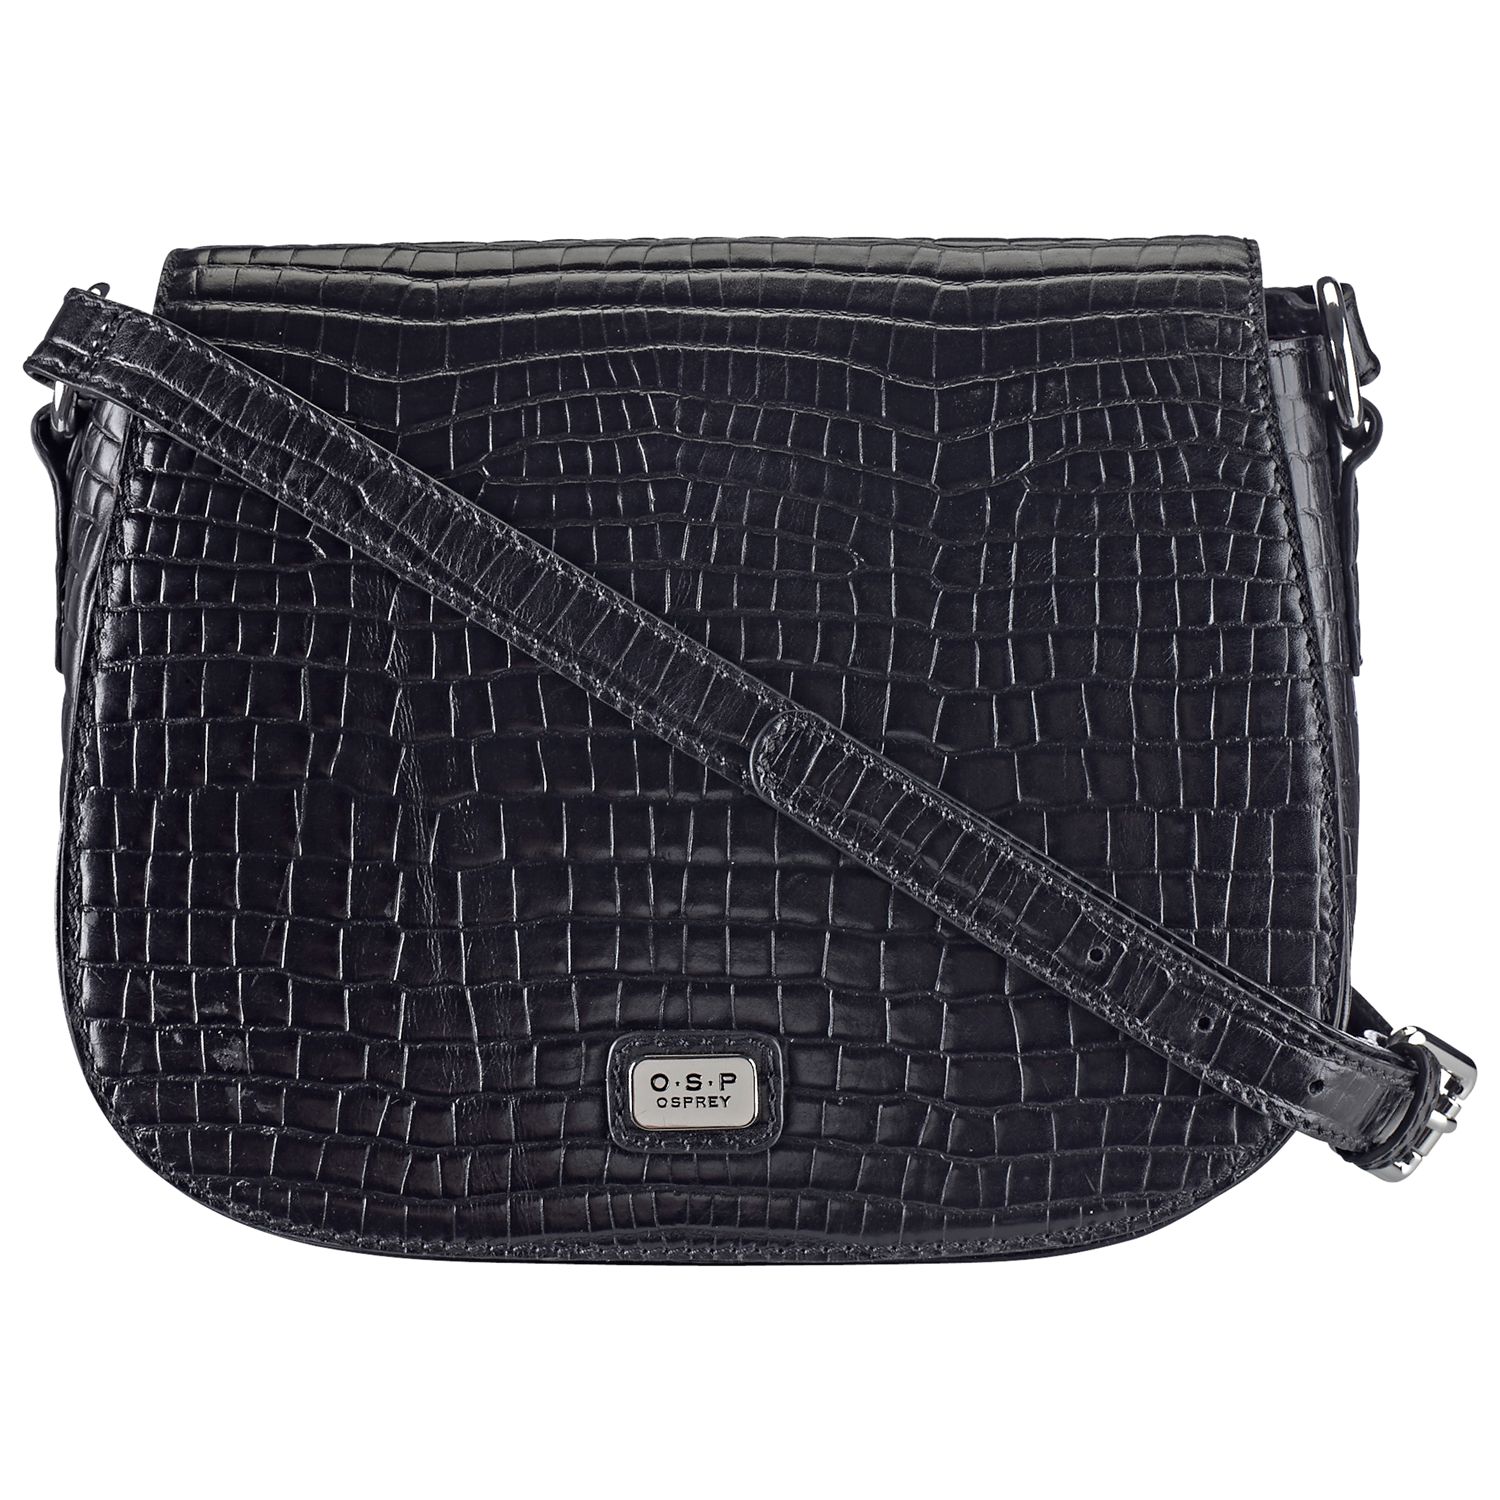 ... Osprey Andria Leather Cross Body Bag, Black Online at johnlewis